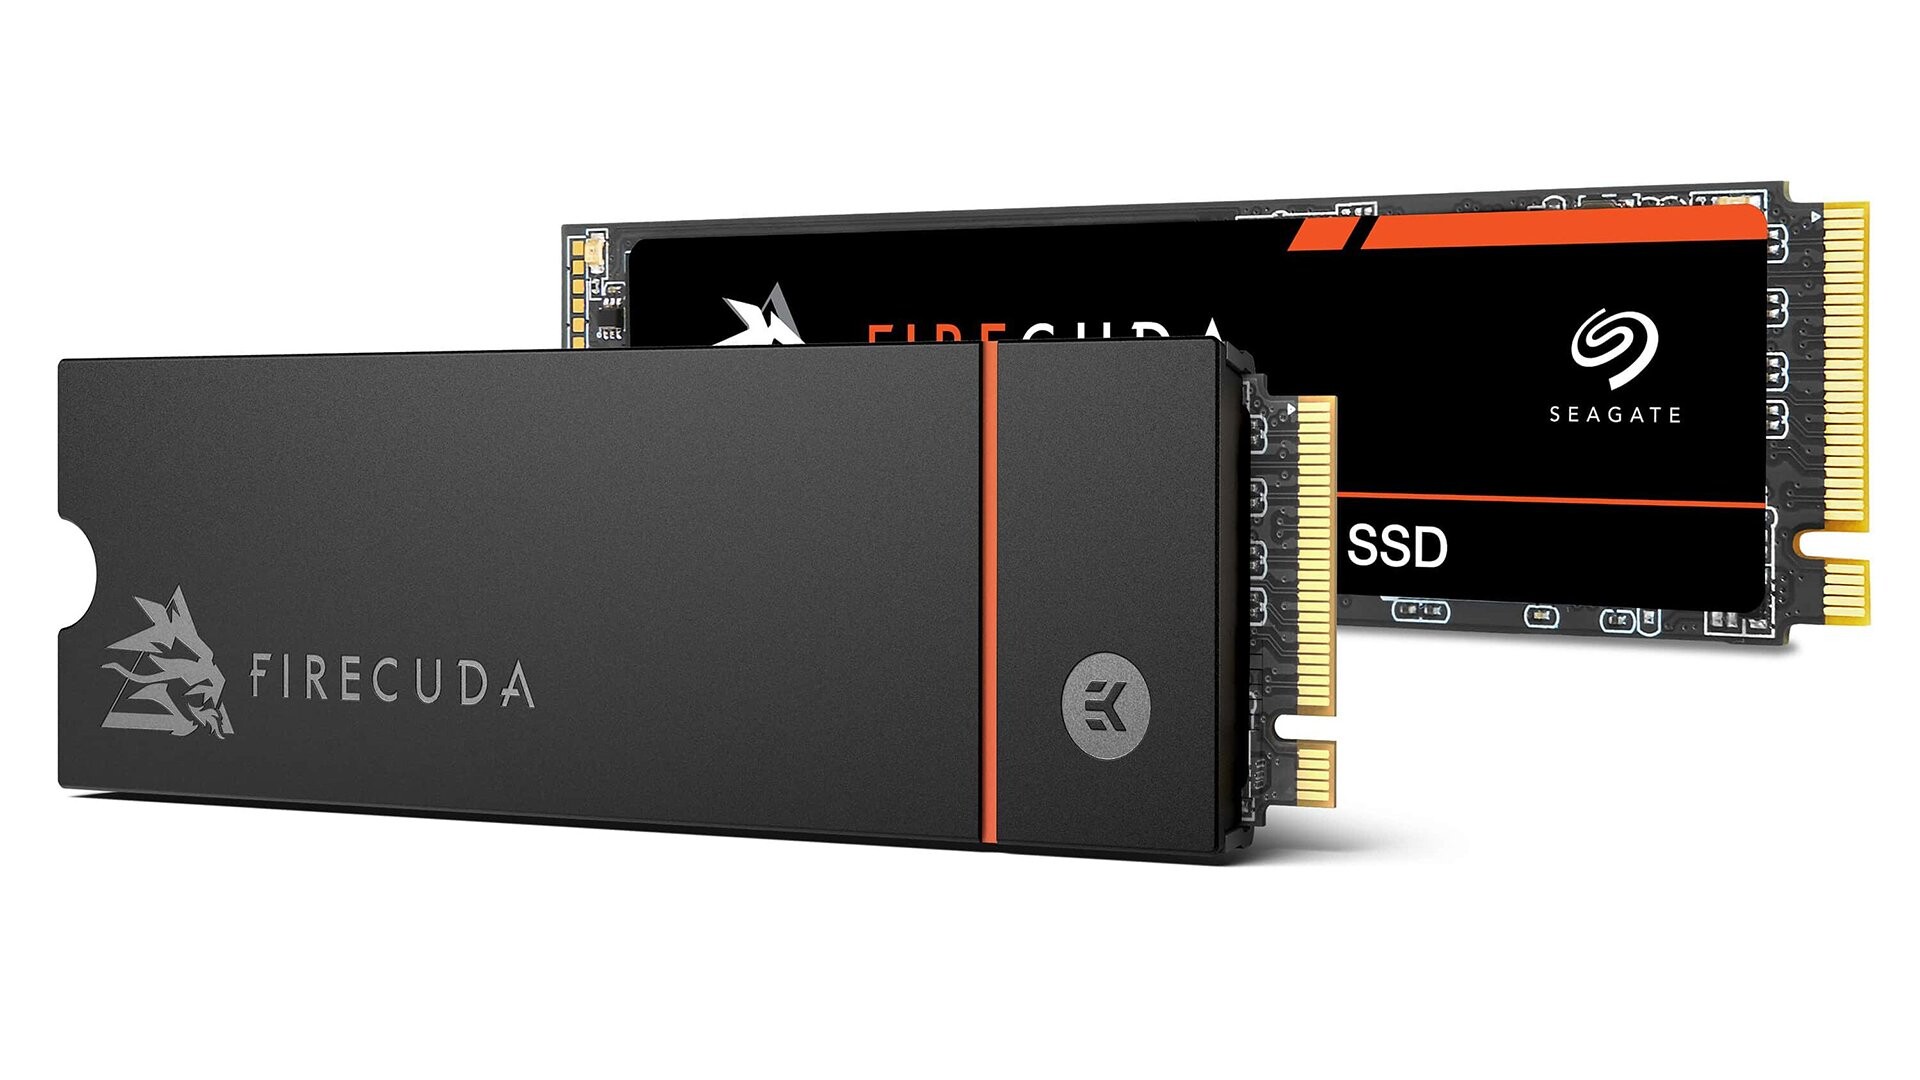 Seagate: Firecuda 530 First PS5-Compatible SSD, $275 for 1 TB